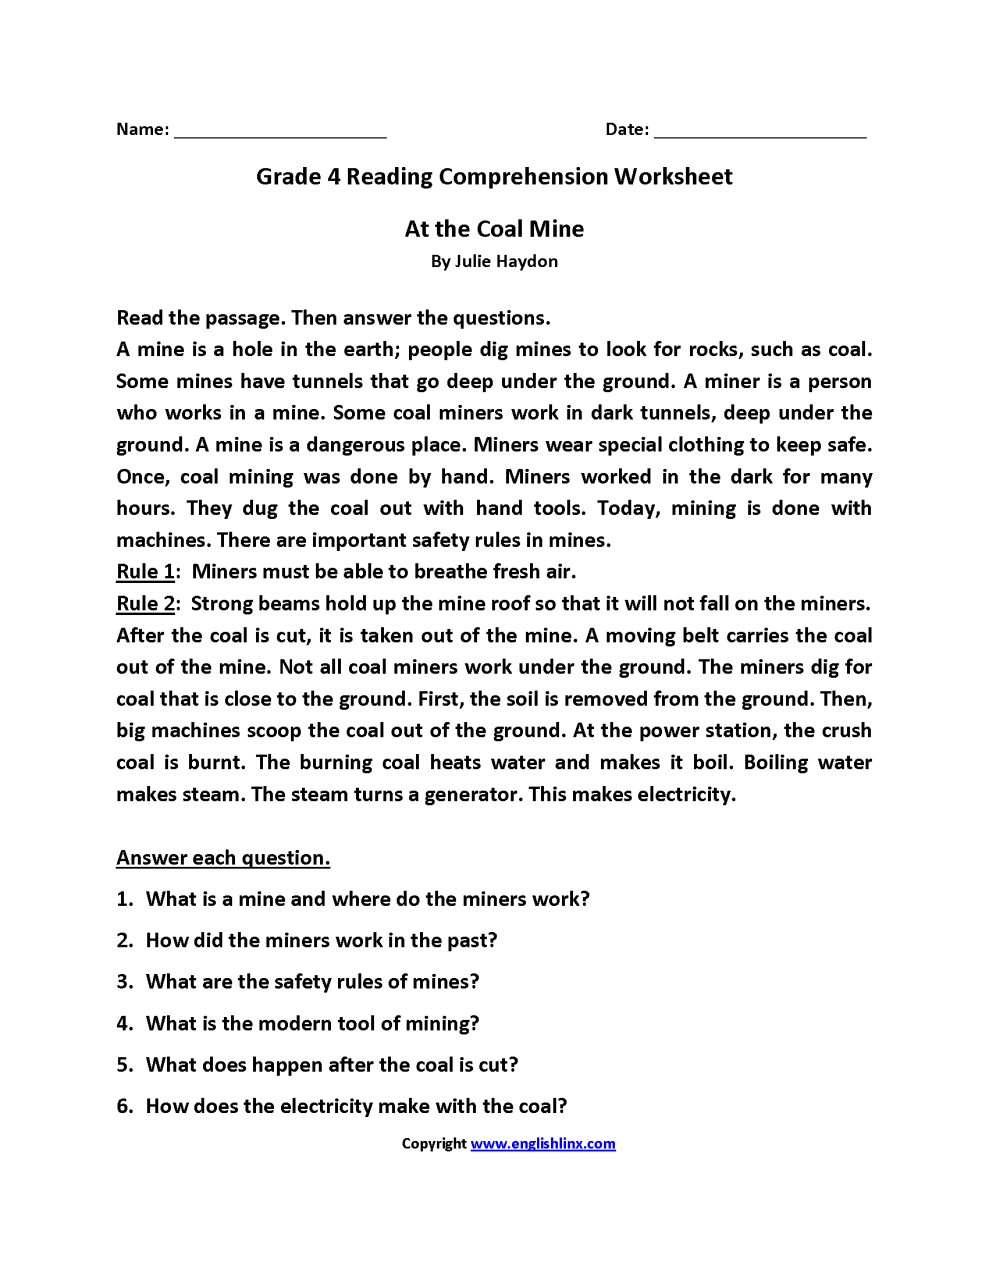 Comprehension Worksheets For Grade 4 With Answers